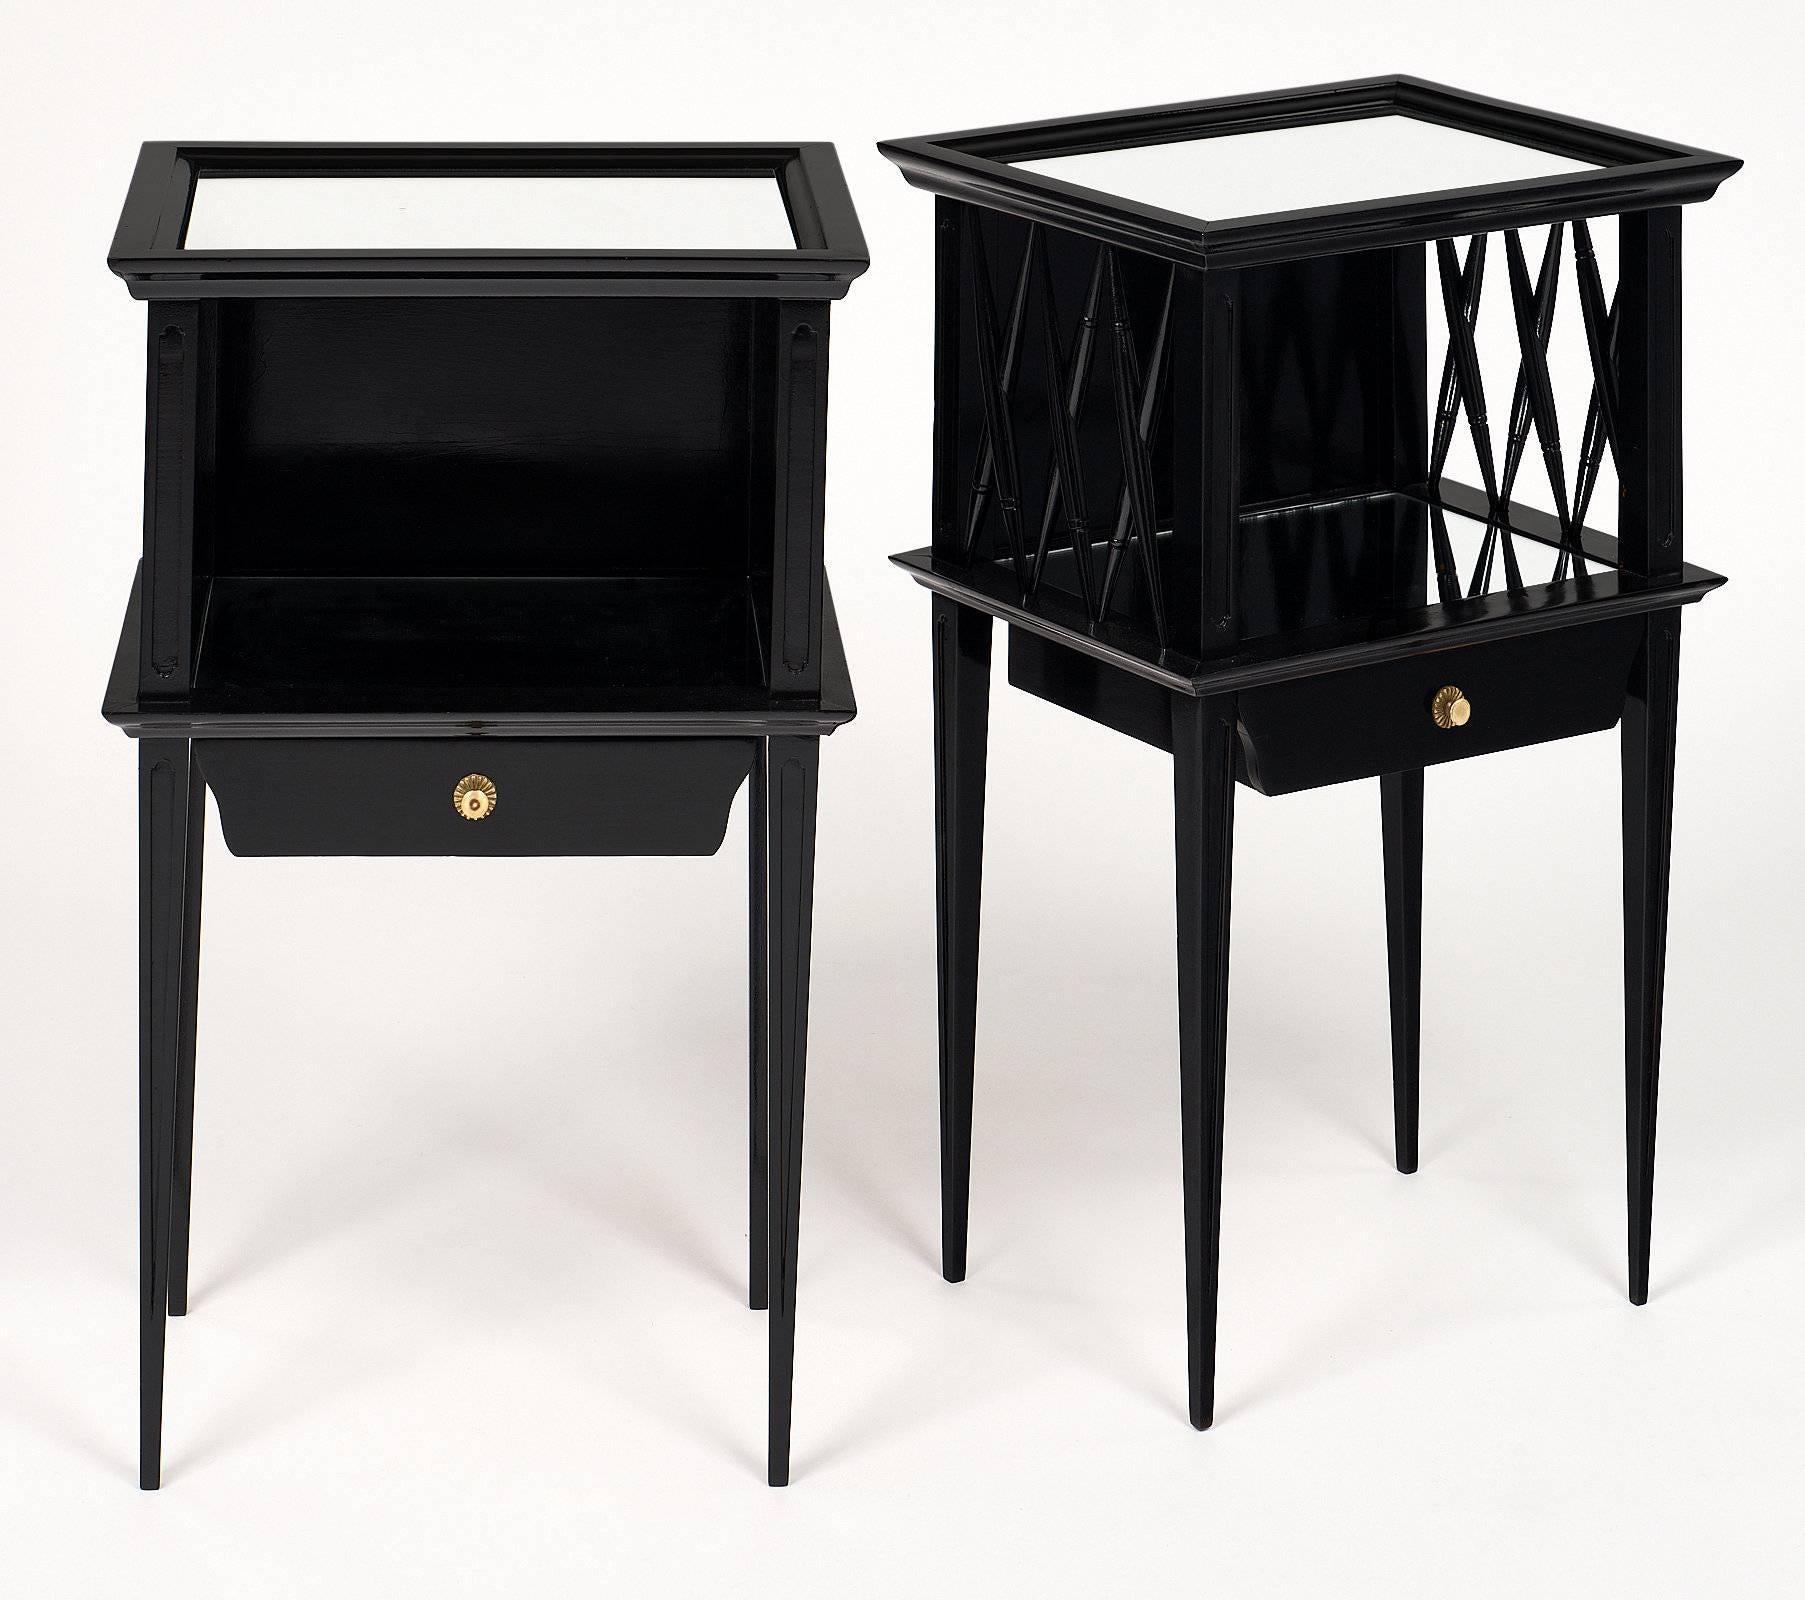 A pair of fine ebonized and French polished side tables in the Directoire style featuring a dovetailed drawer with a gilt brass pull, two mirrored shelves, and a niche sided with X lattice work. We loved the elegant refined look of these two